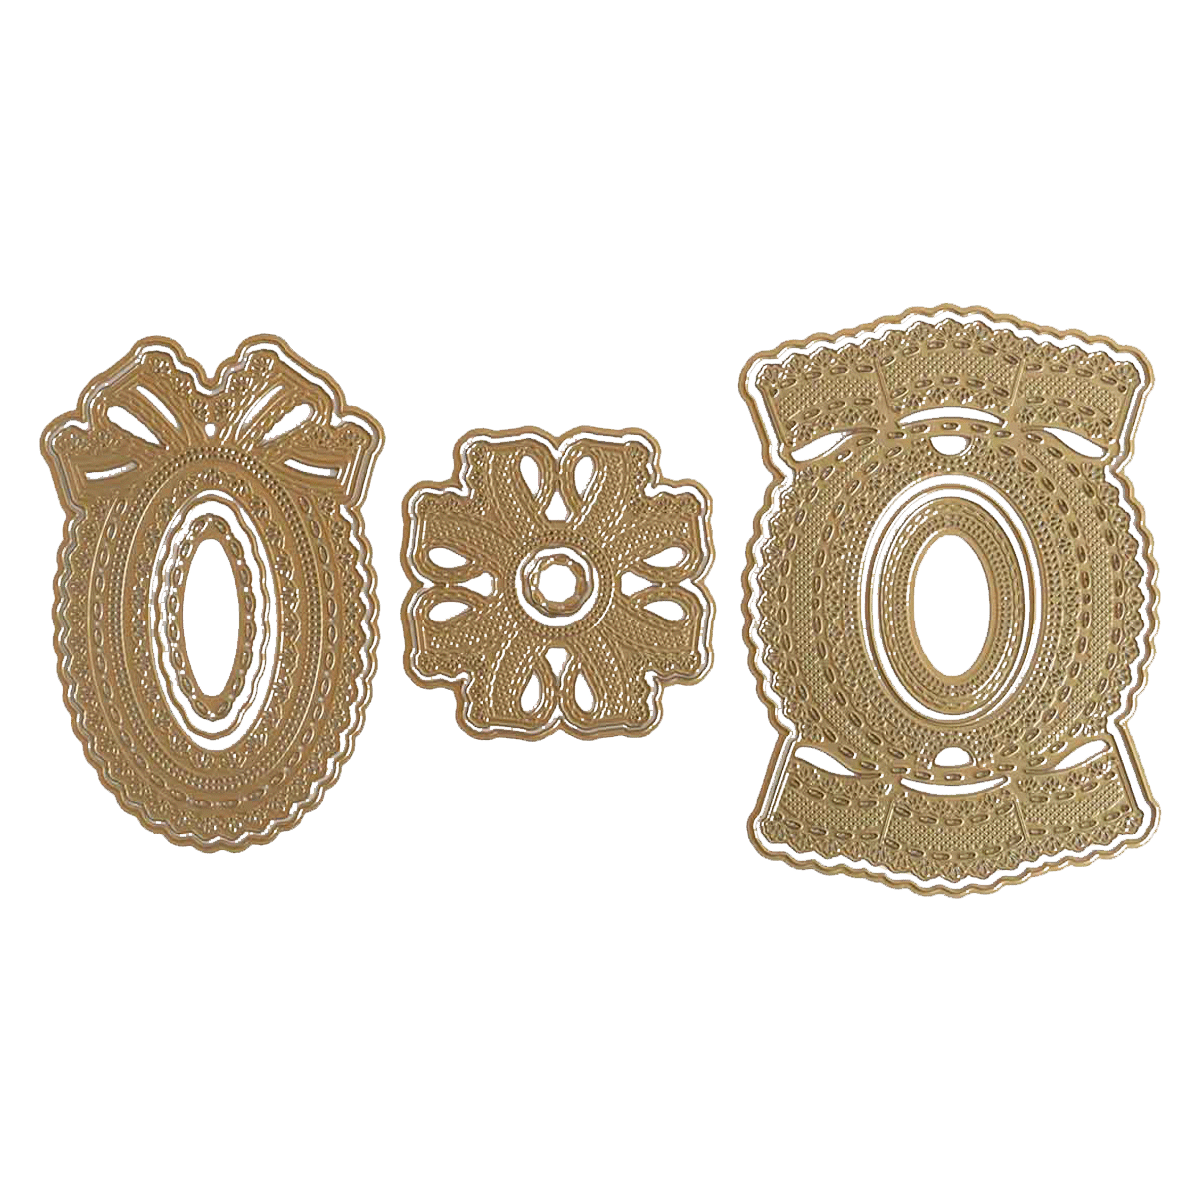 a set of three decorative objects on a green background.